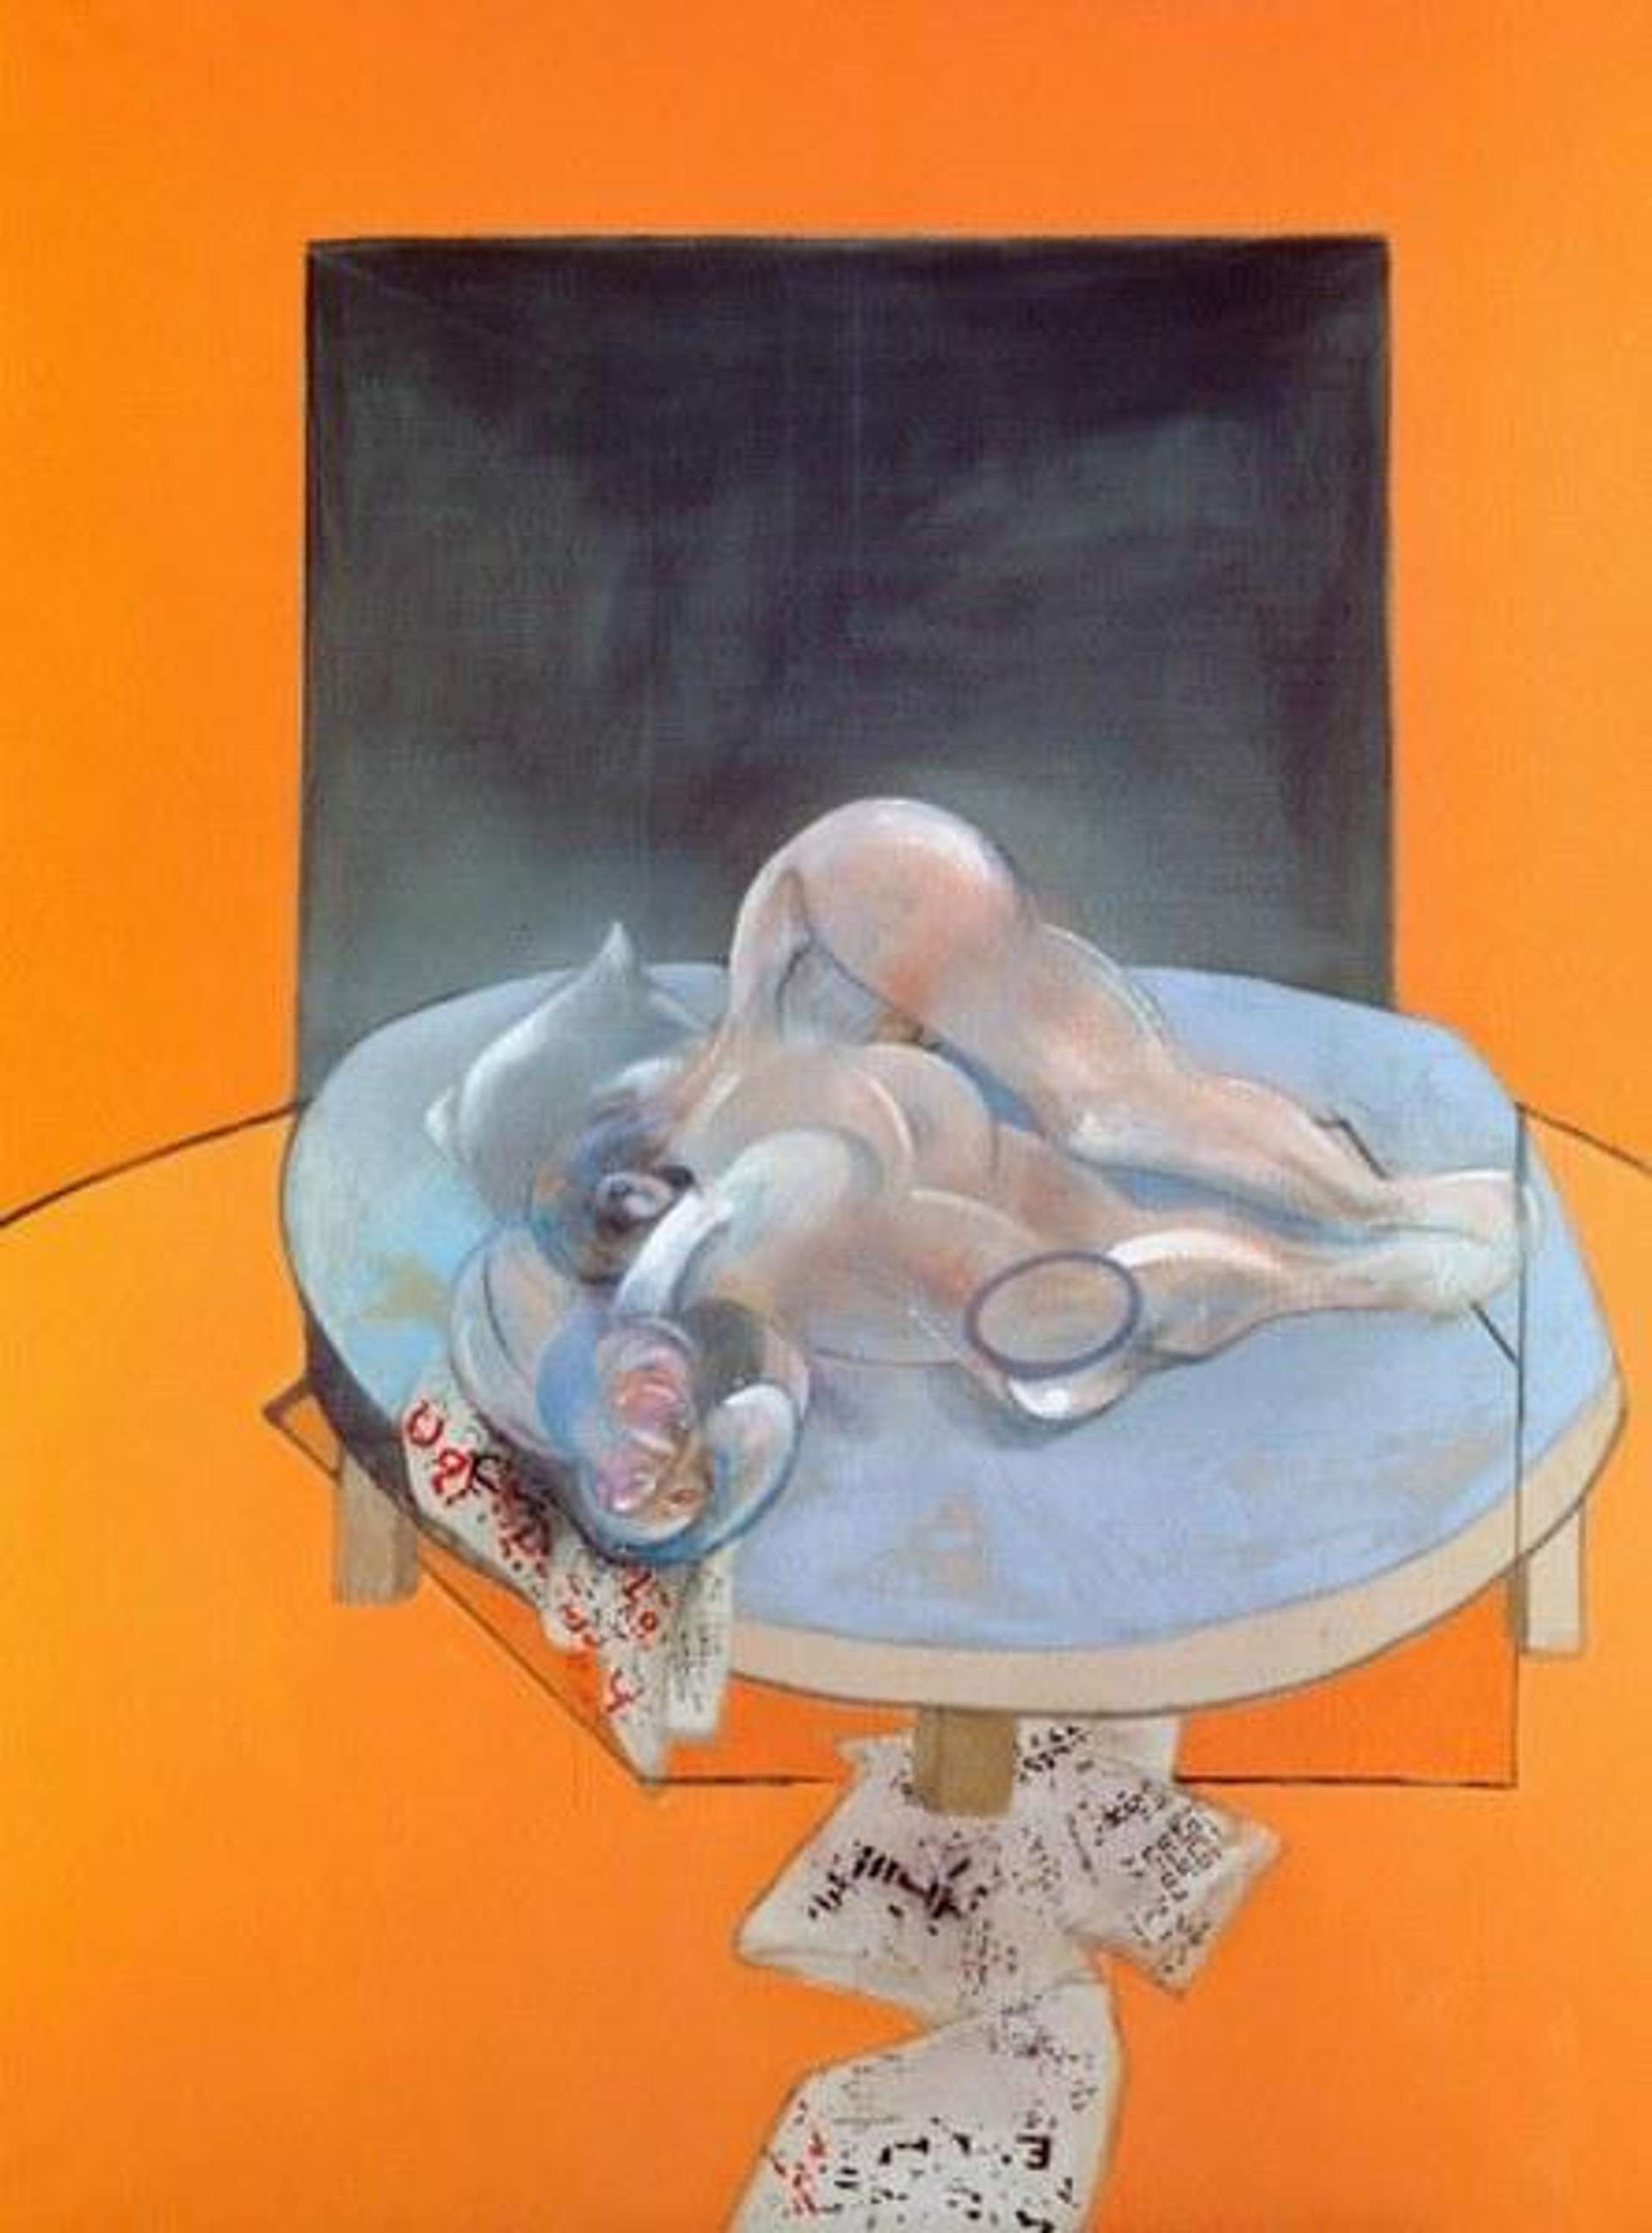 Francis Bacon: Three Studies Of The Human Body (central panel) - Signed Print